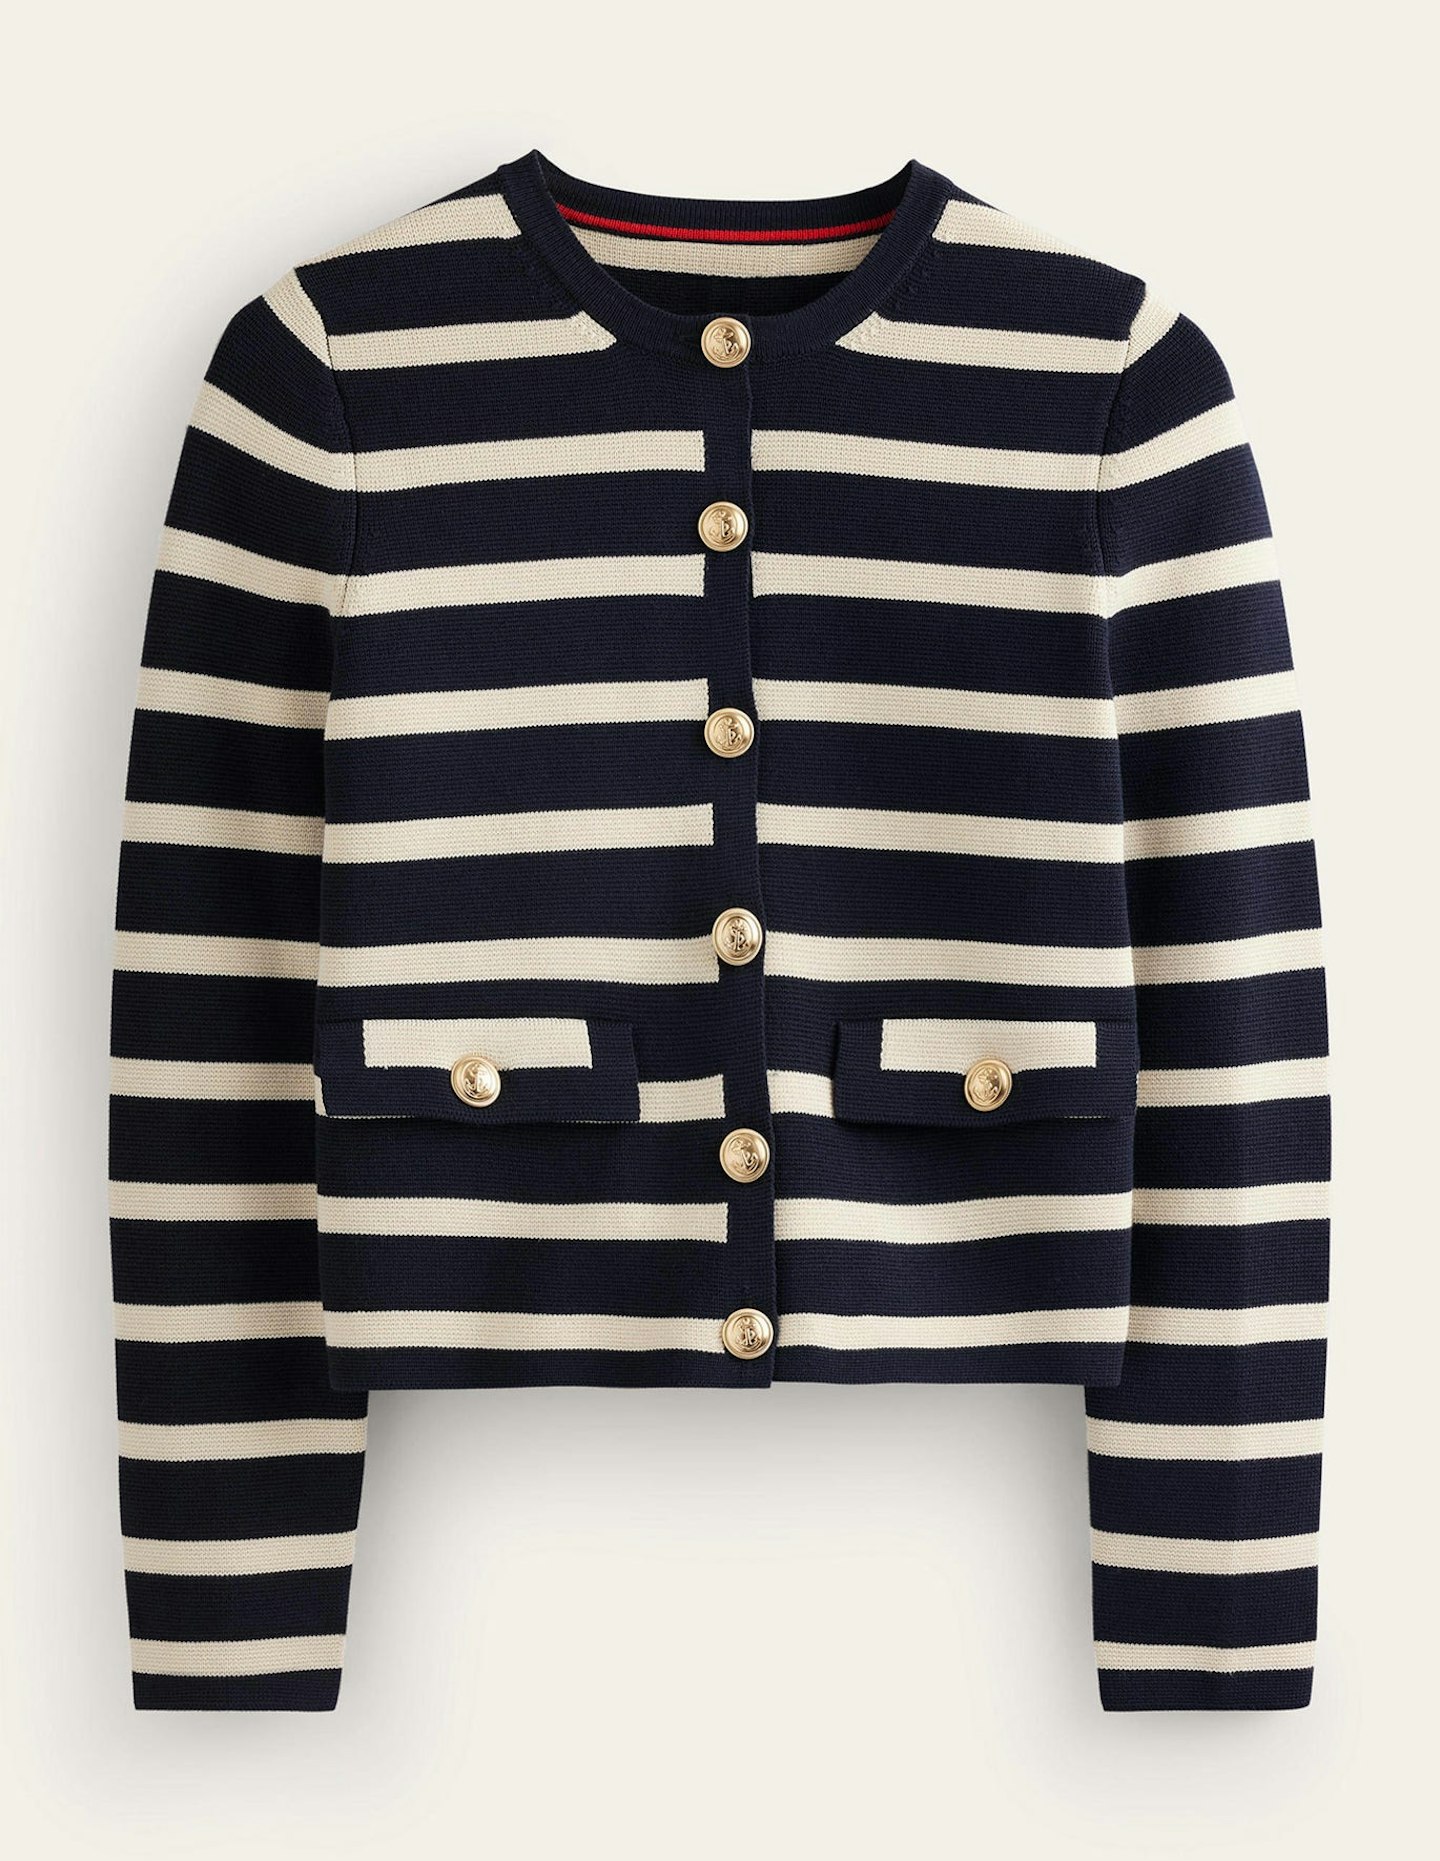 Boden, Holly Knitted Jacket